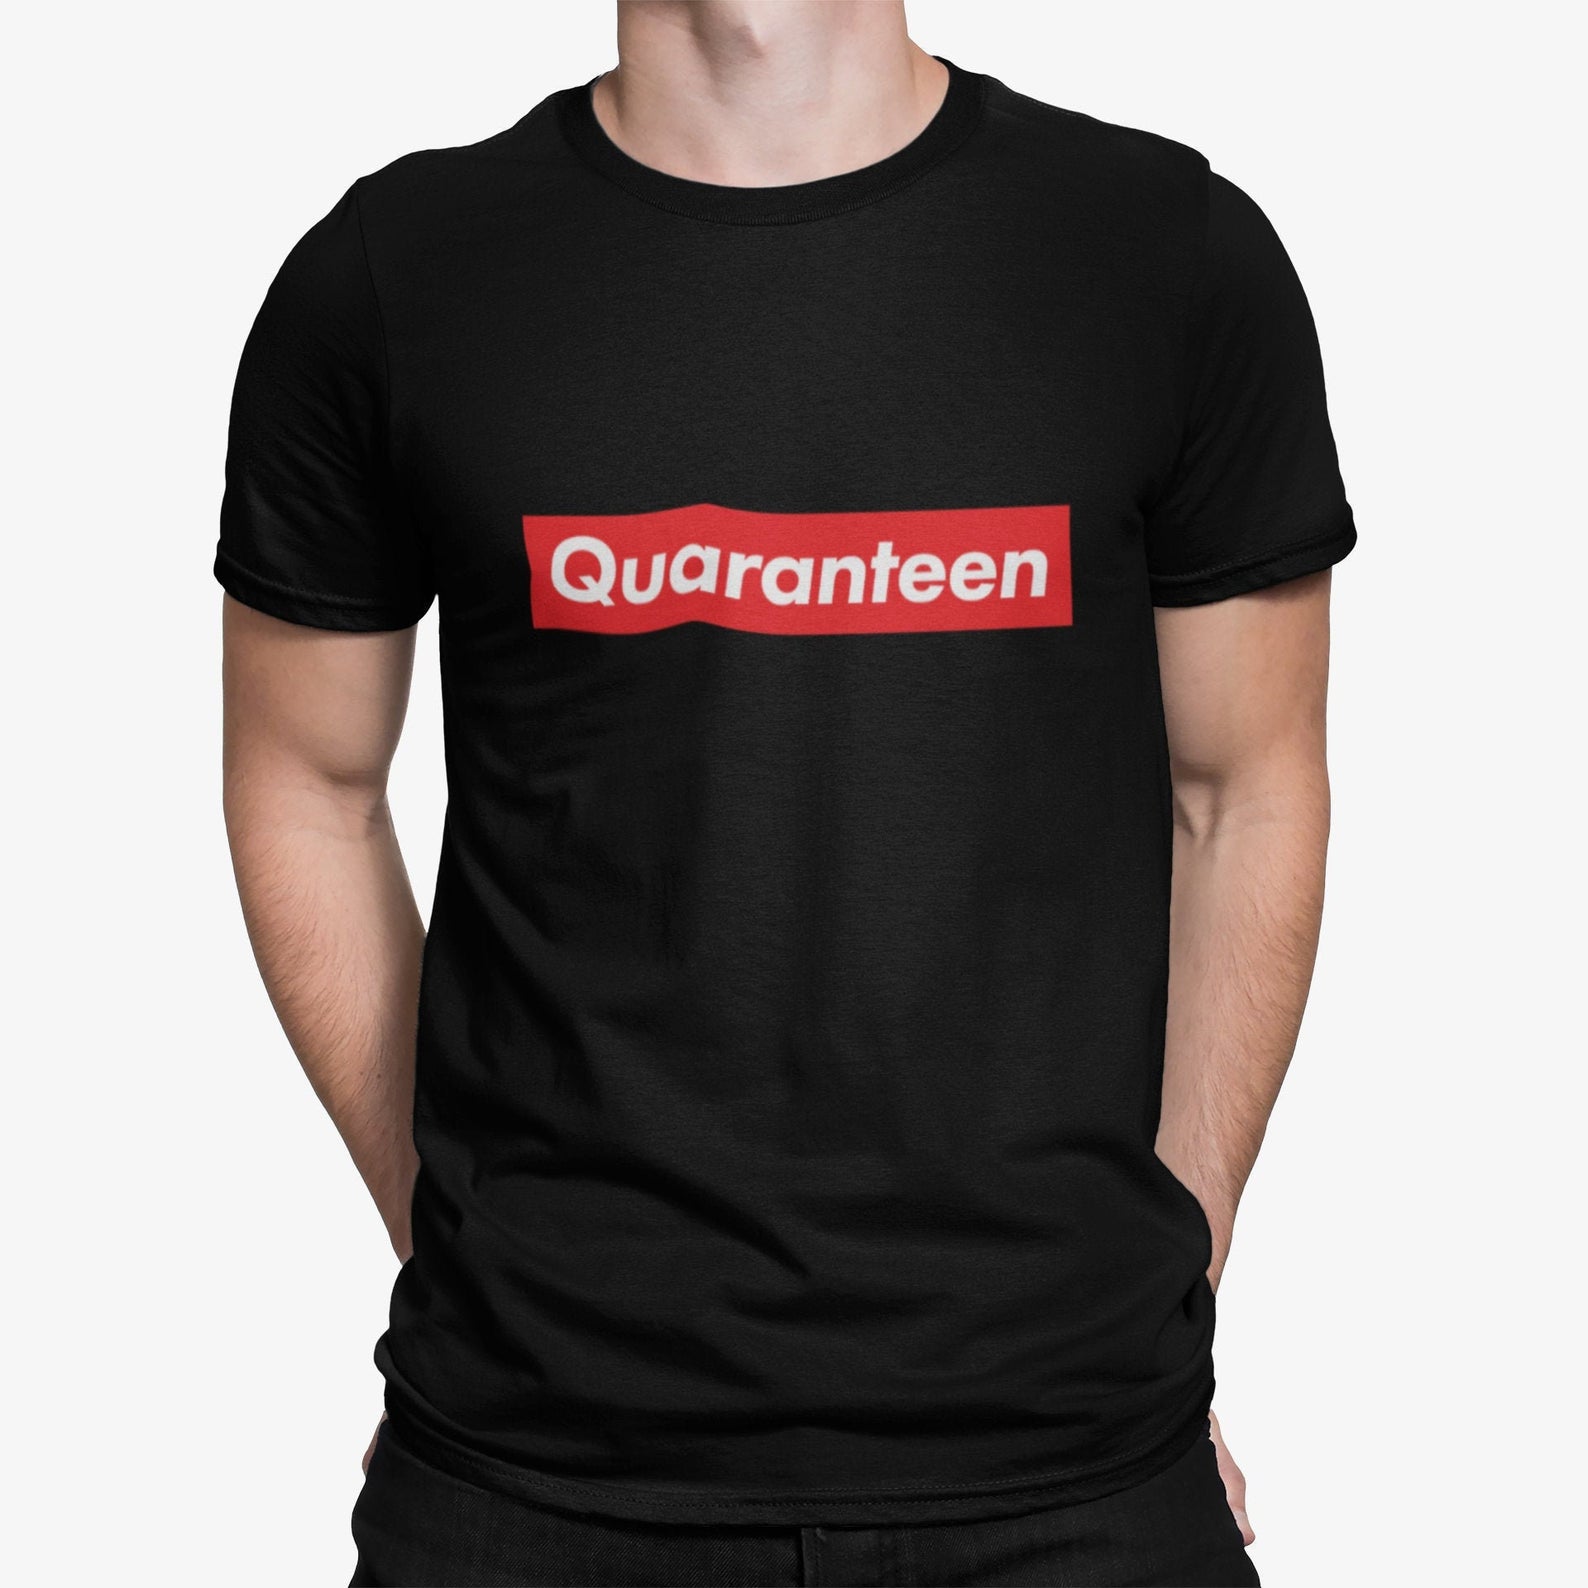 10 best gifts for teens : Quaranteen T-Shirt | Small Business Holiday Gifts 2020